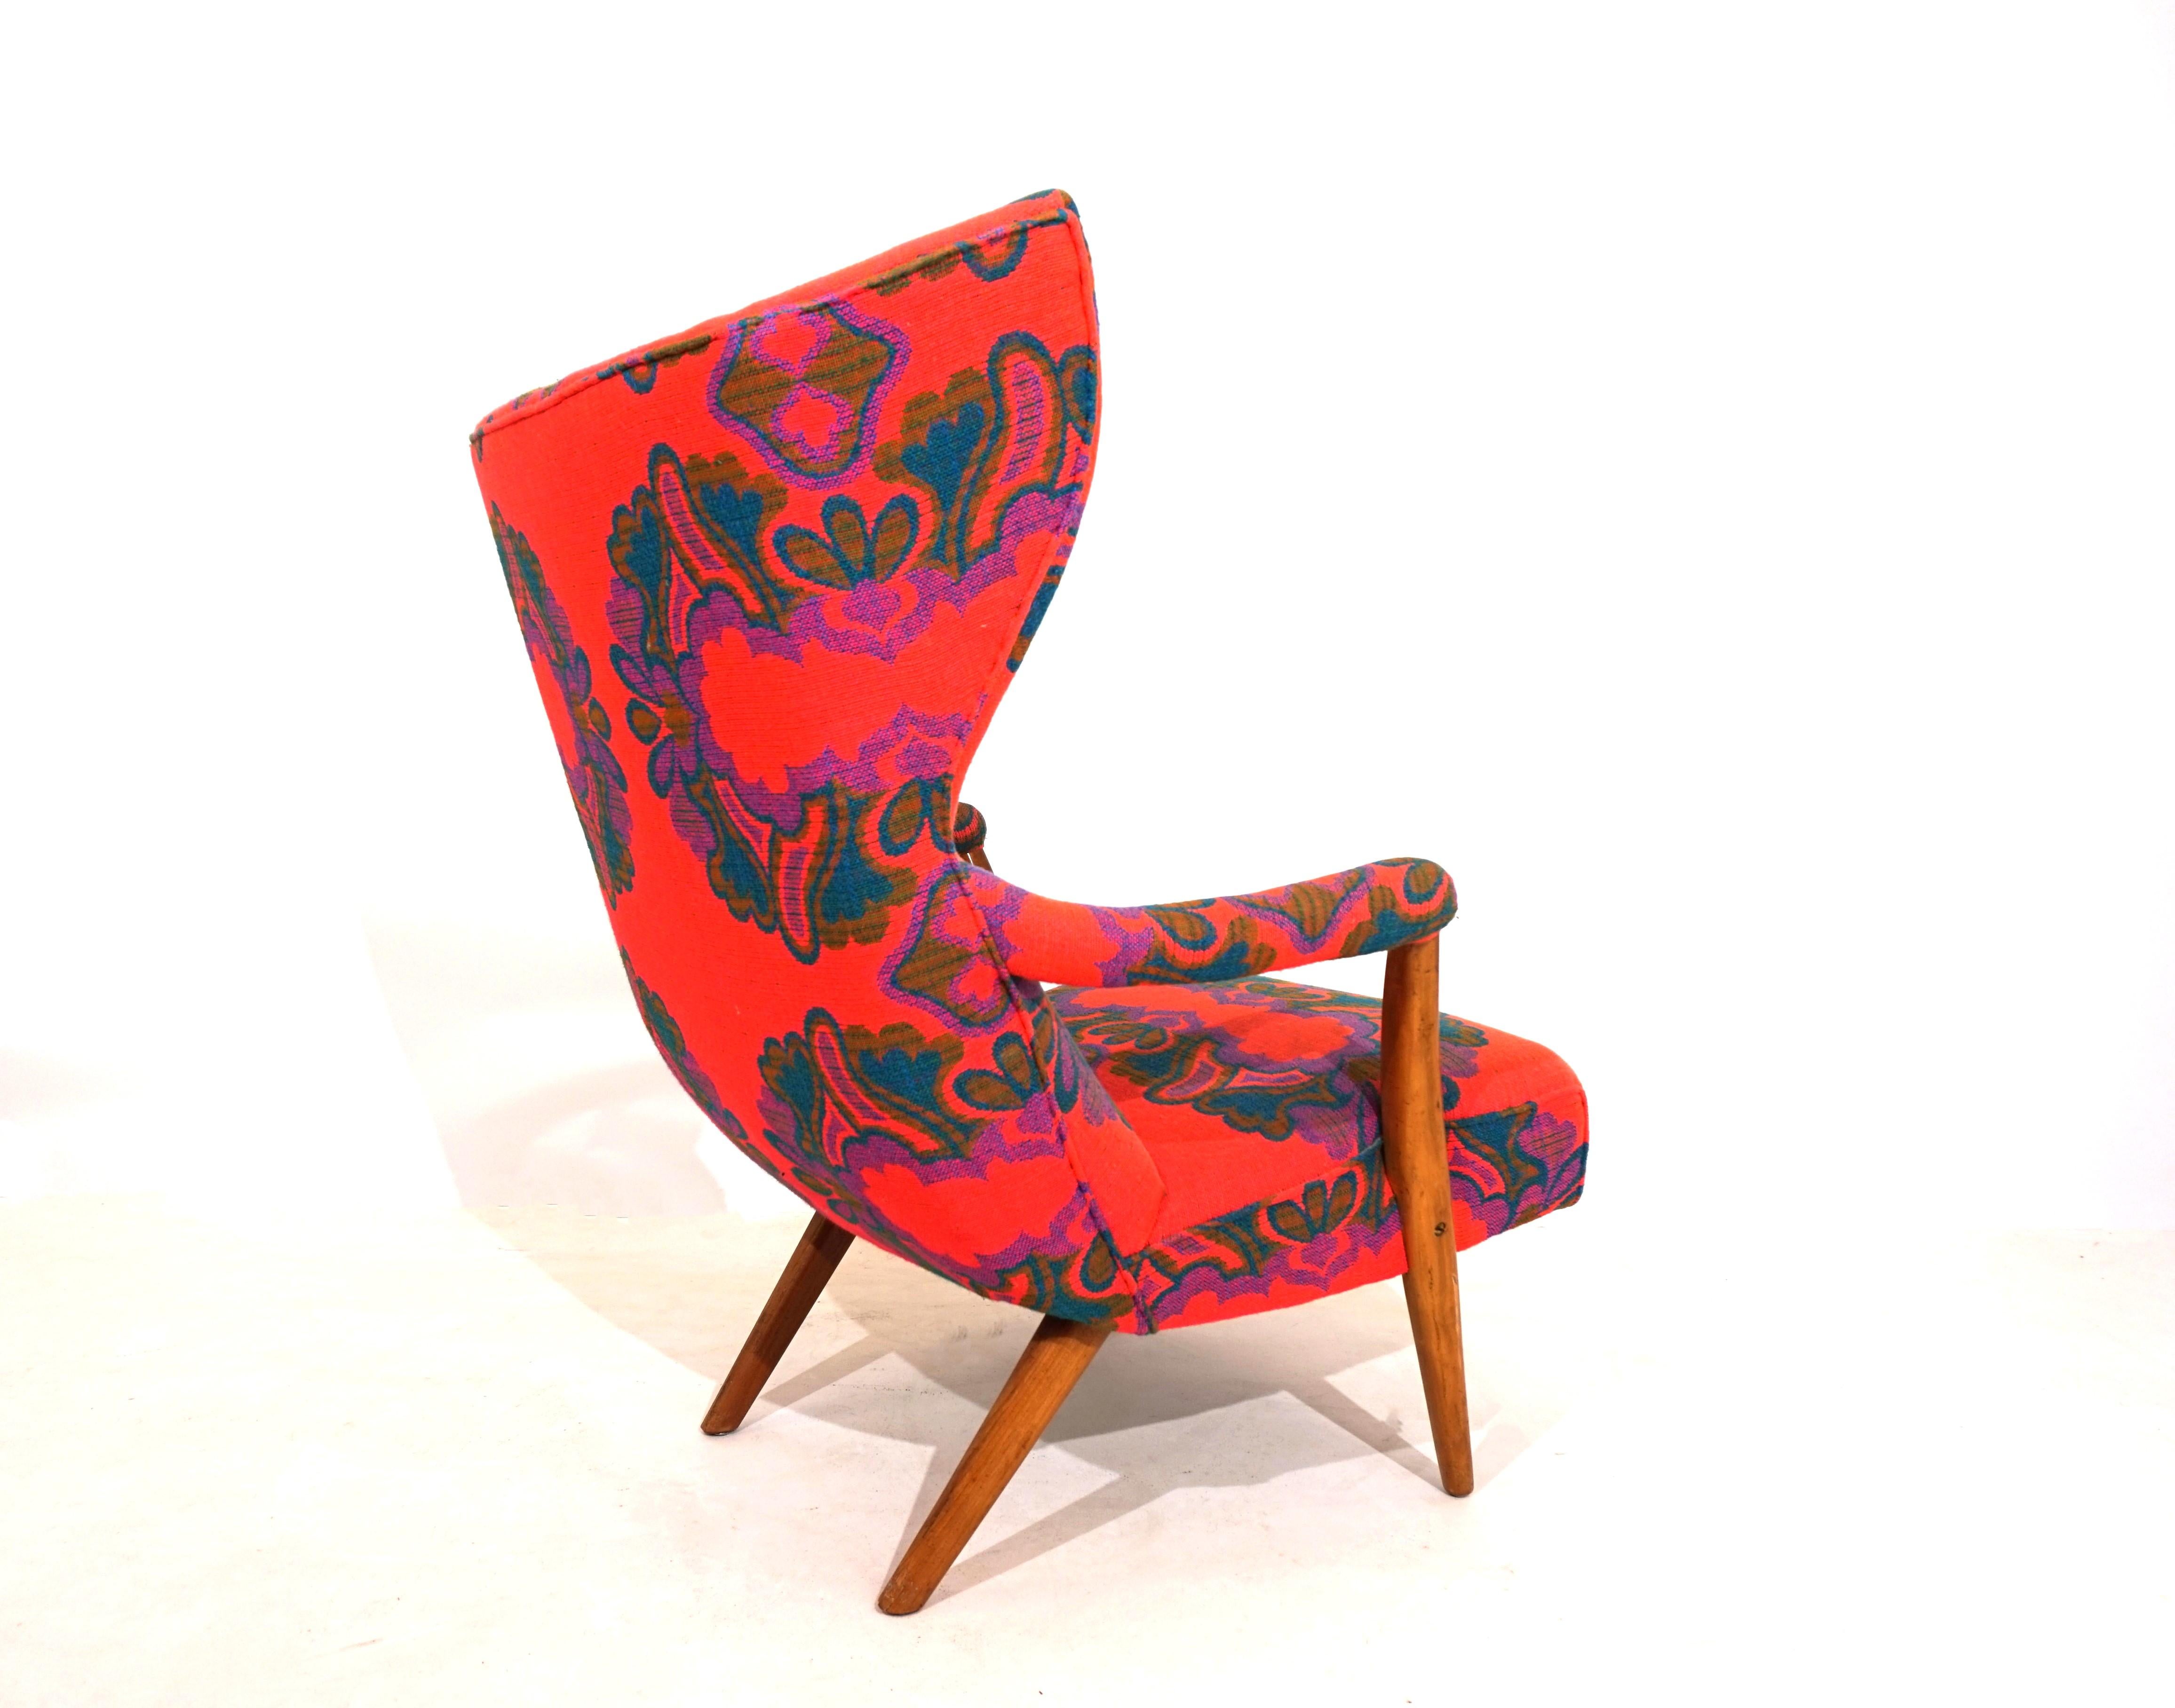 This extraordinary armchair comes in a colorful dress and in very good condition. The dramatic lines of the armchair and the fantastic, coarse fabric designed in great colors and patterns make this armchair the highlight of any room. The armrests